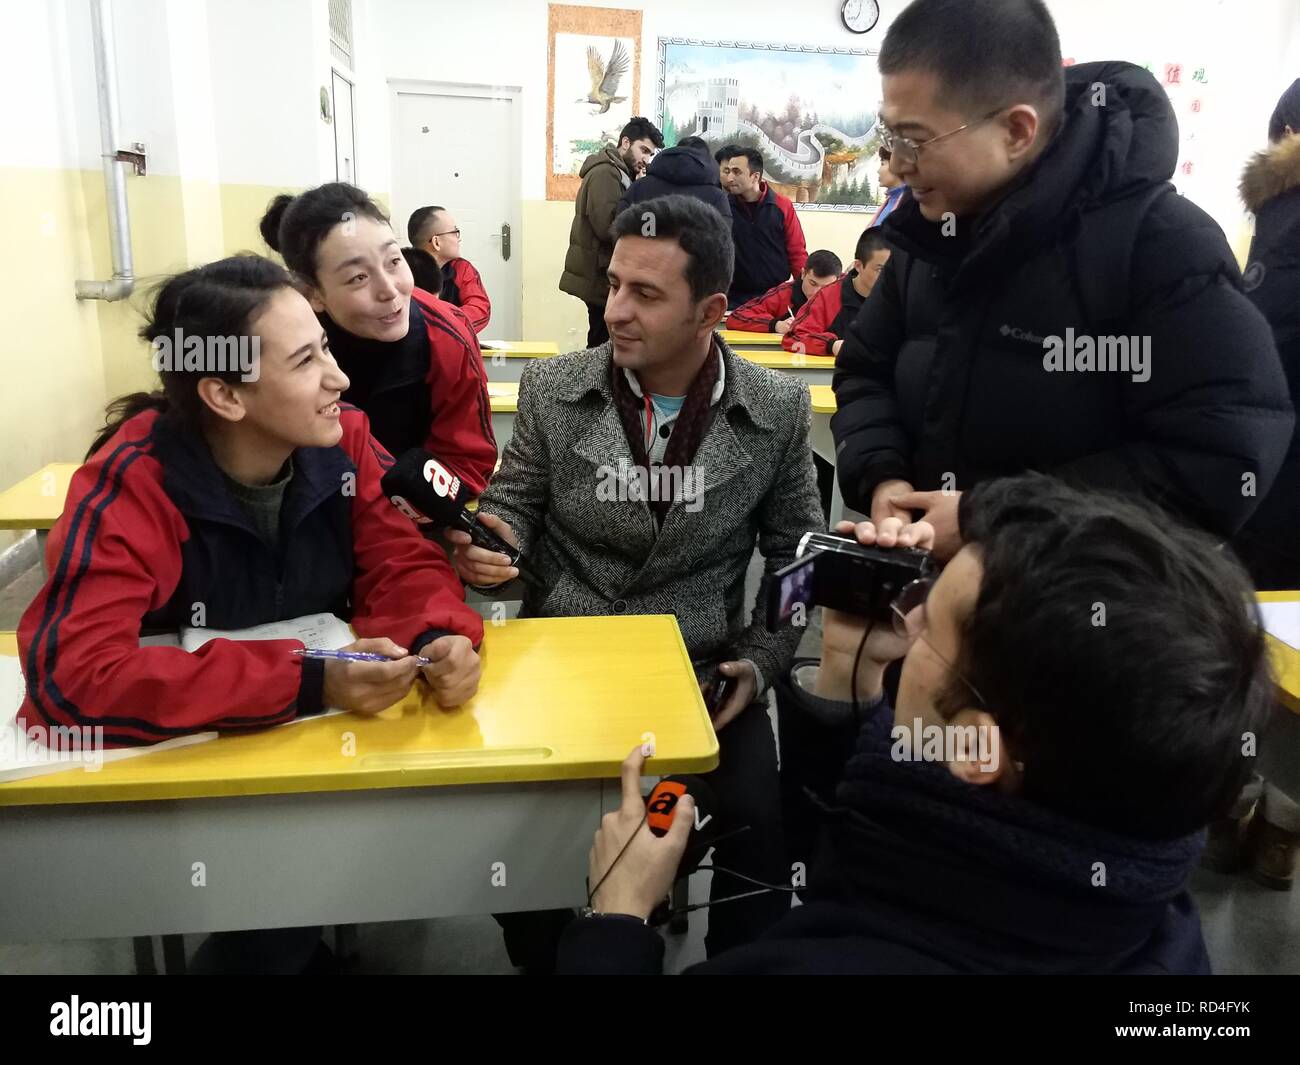 (190117) -- URUMQI, Jan. 17, 2019 (Xinhua) -- Foreign journalists interview students at Kashgar vocational education and training center in Kashgar, northwest China's Xinjiang Uygur Autonomous Region, Jan. 13, 2019. A media group consisting of people from six countries praised the development and stability of Xinjiang after visiting the region. The Silk Road Celebrity China Tour was held from Jan. 9 to 16 in Xinjiang, with 12 media representatives from Egypt, Turkey, Pakistan, Afghanistan, Bangladesh and Sri Lanka visiting locals and a vocational training center. (Xinhua/Yu Tao) Stock Photo